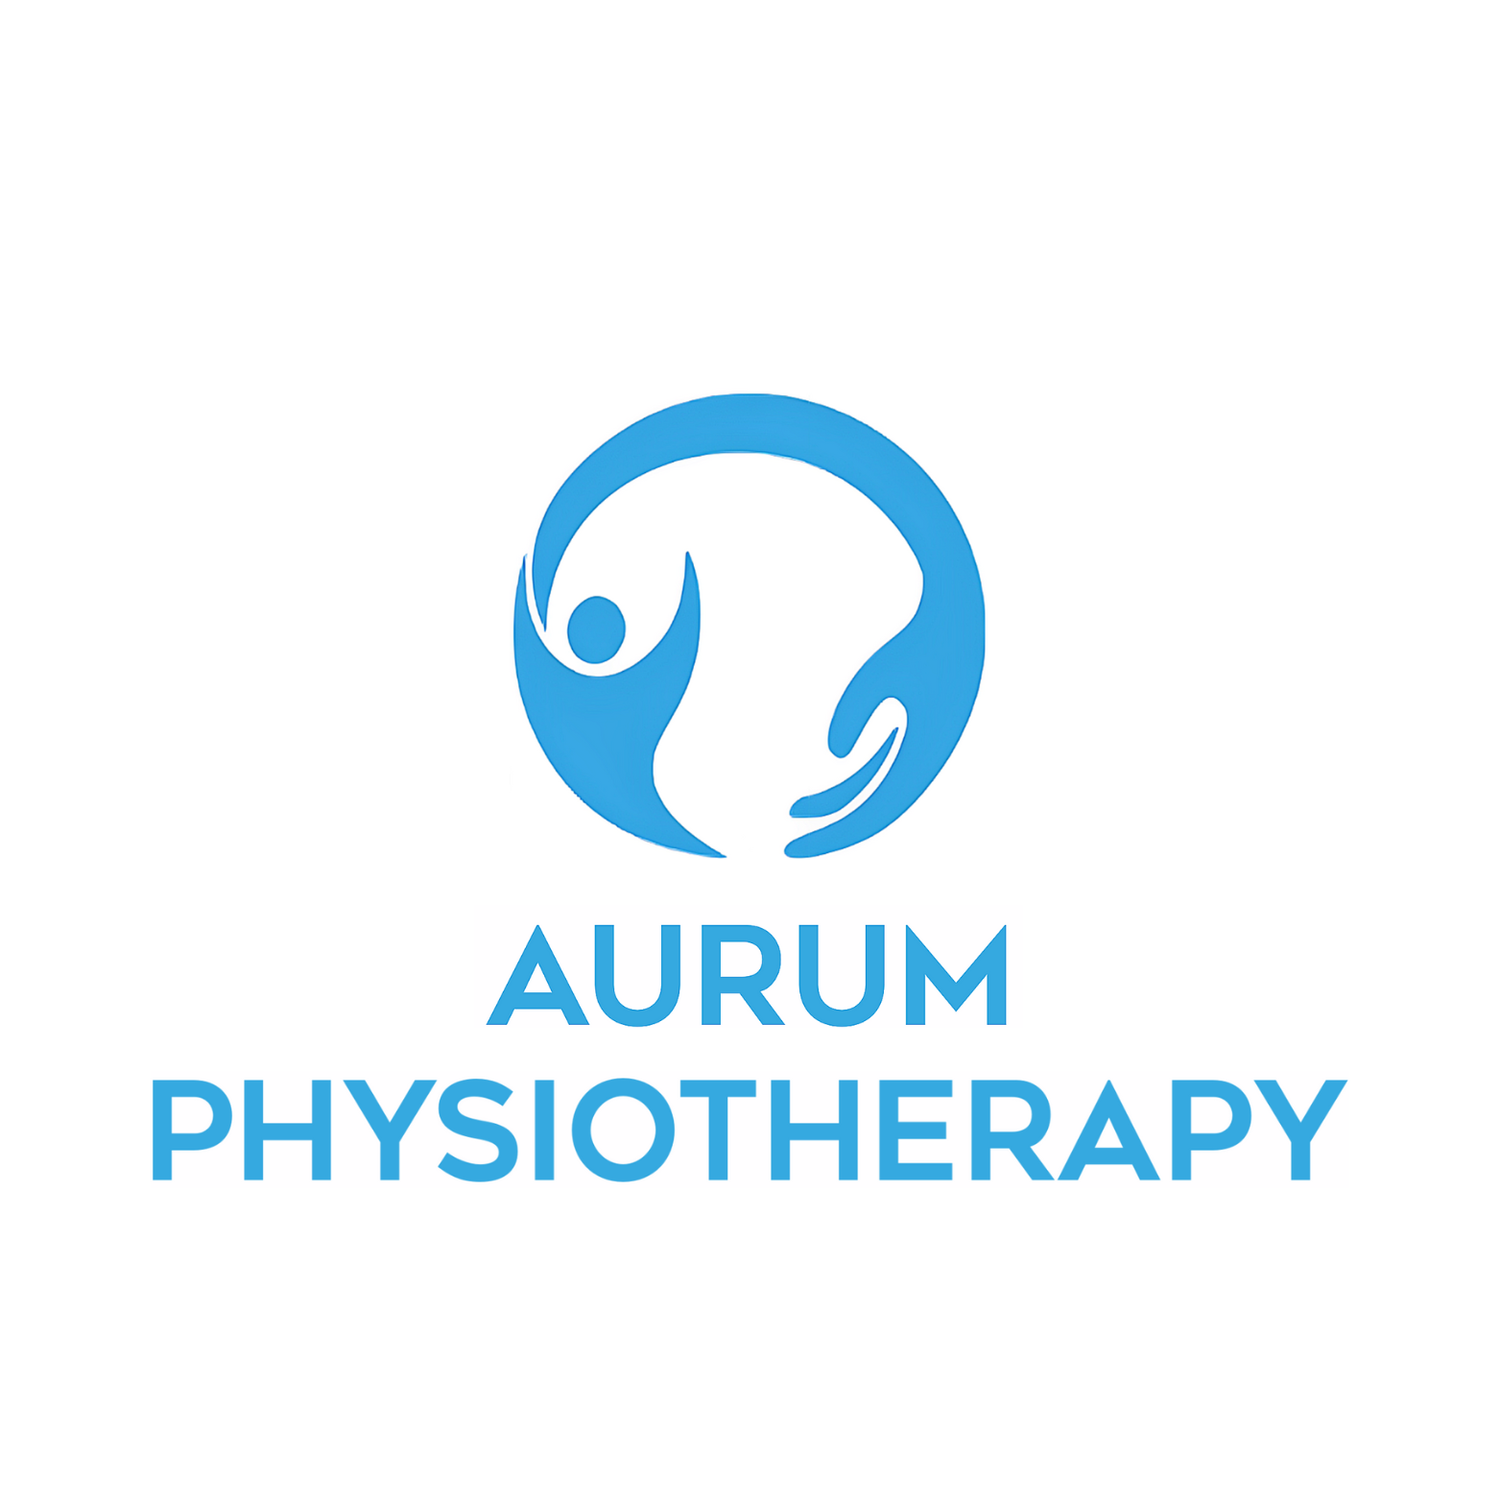 Aurum Physiotherapy